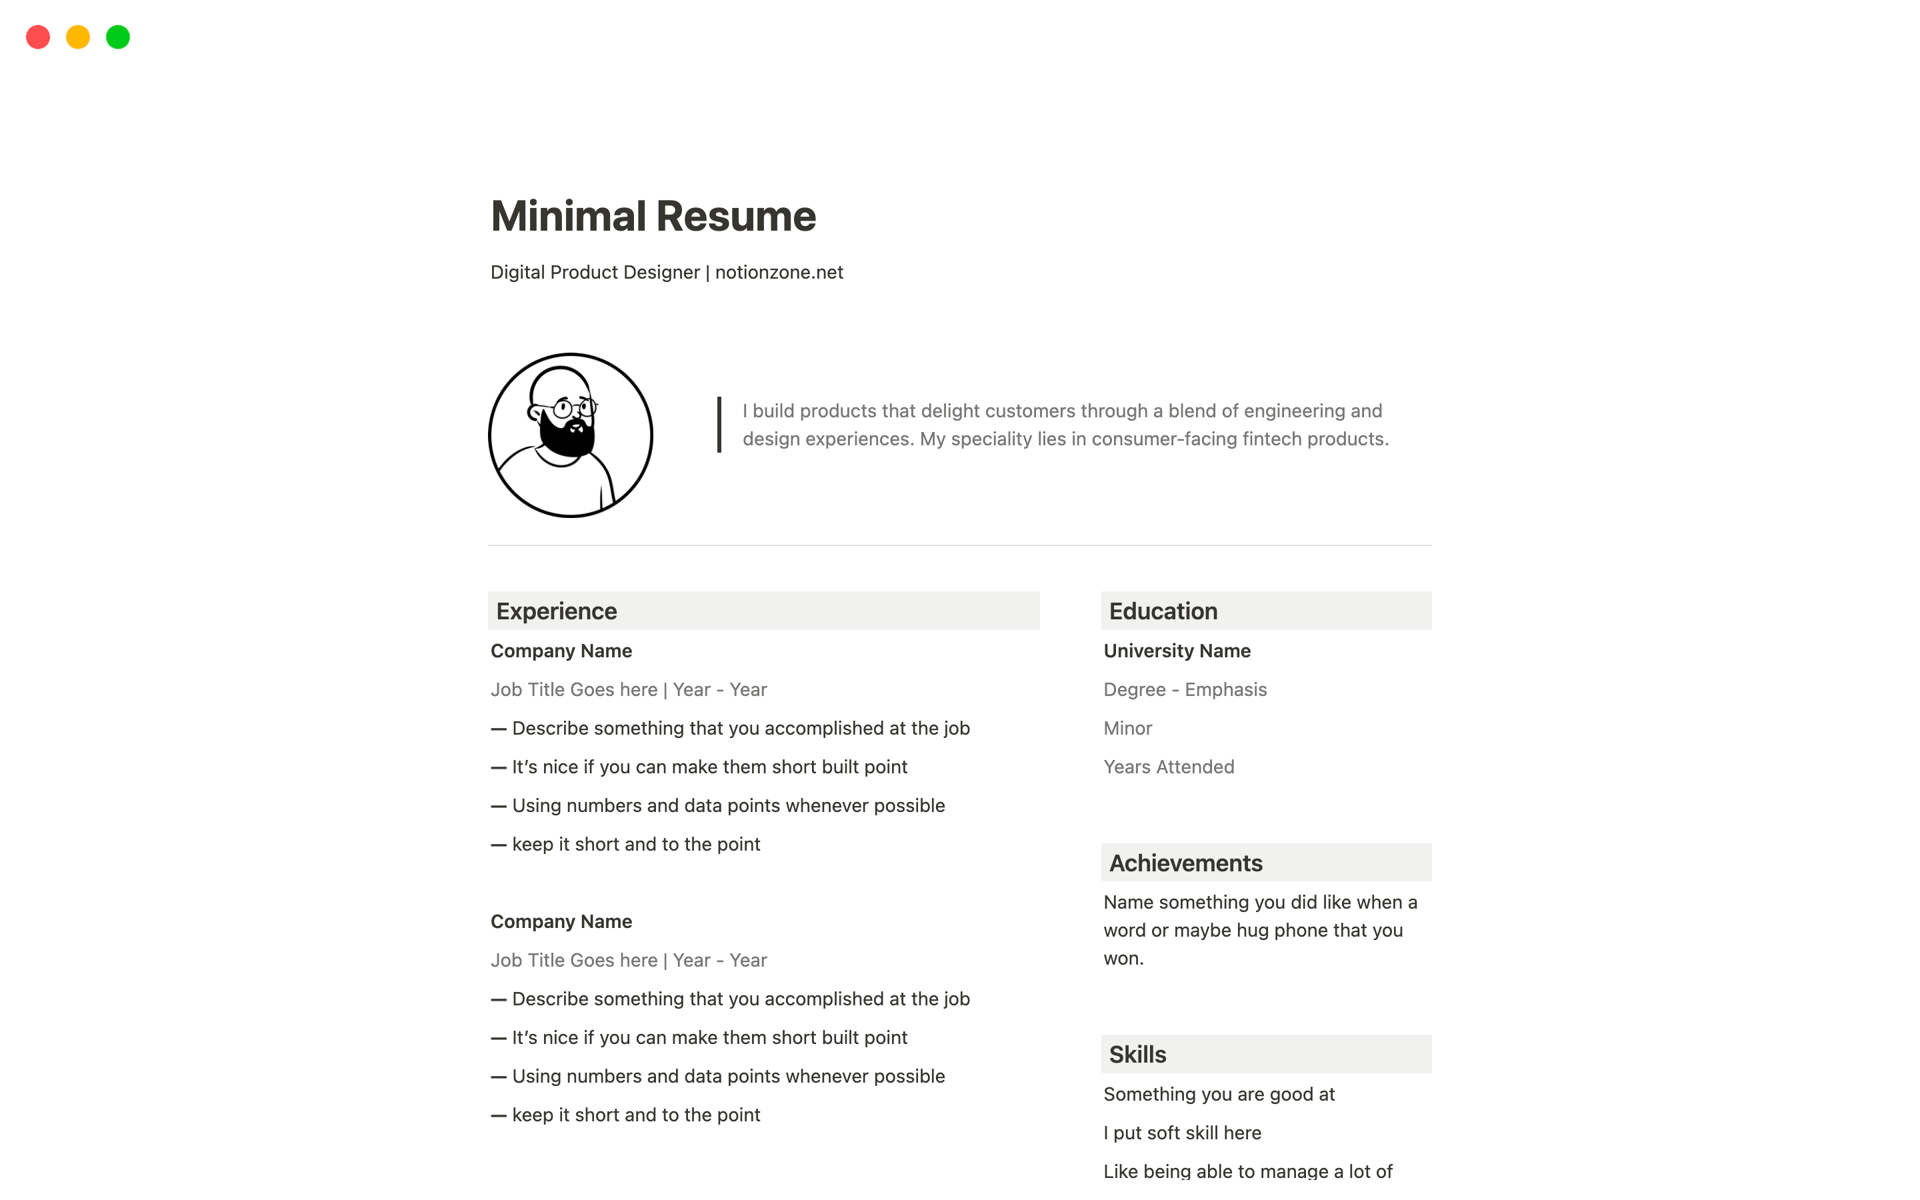 Notion Resume Template: Your Career Launchpad